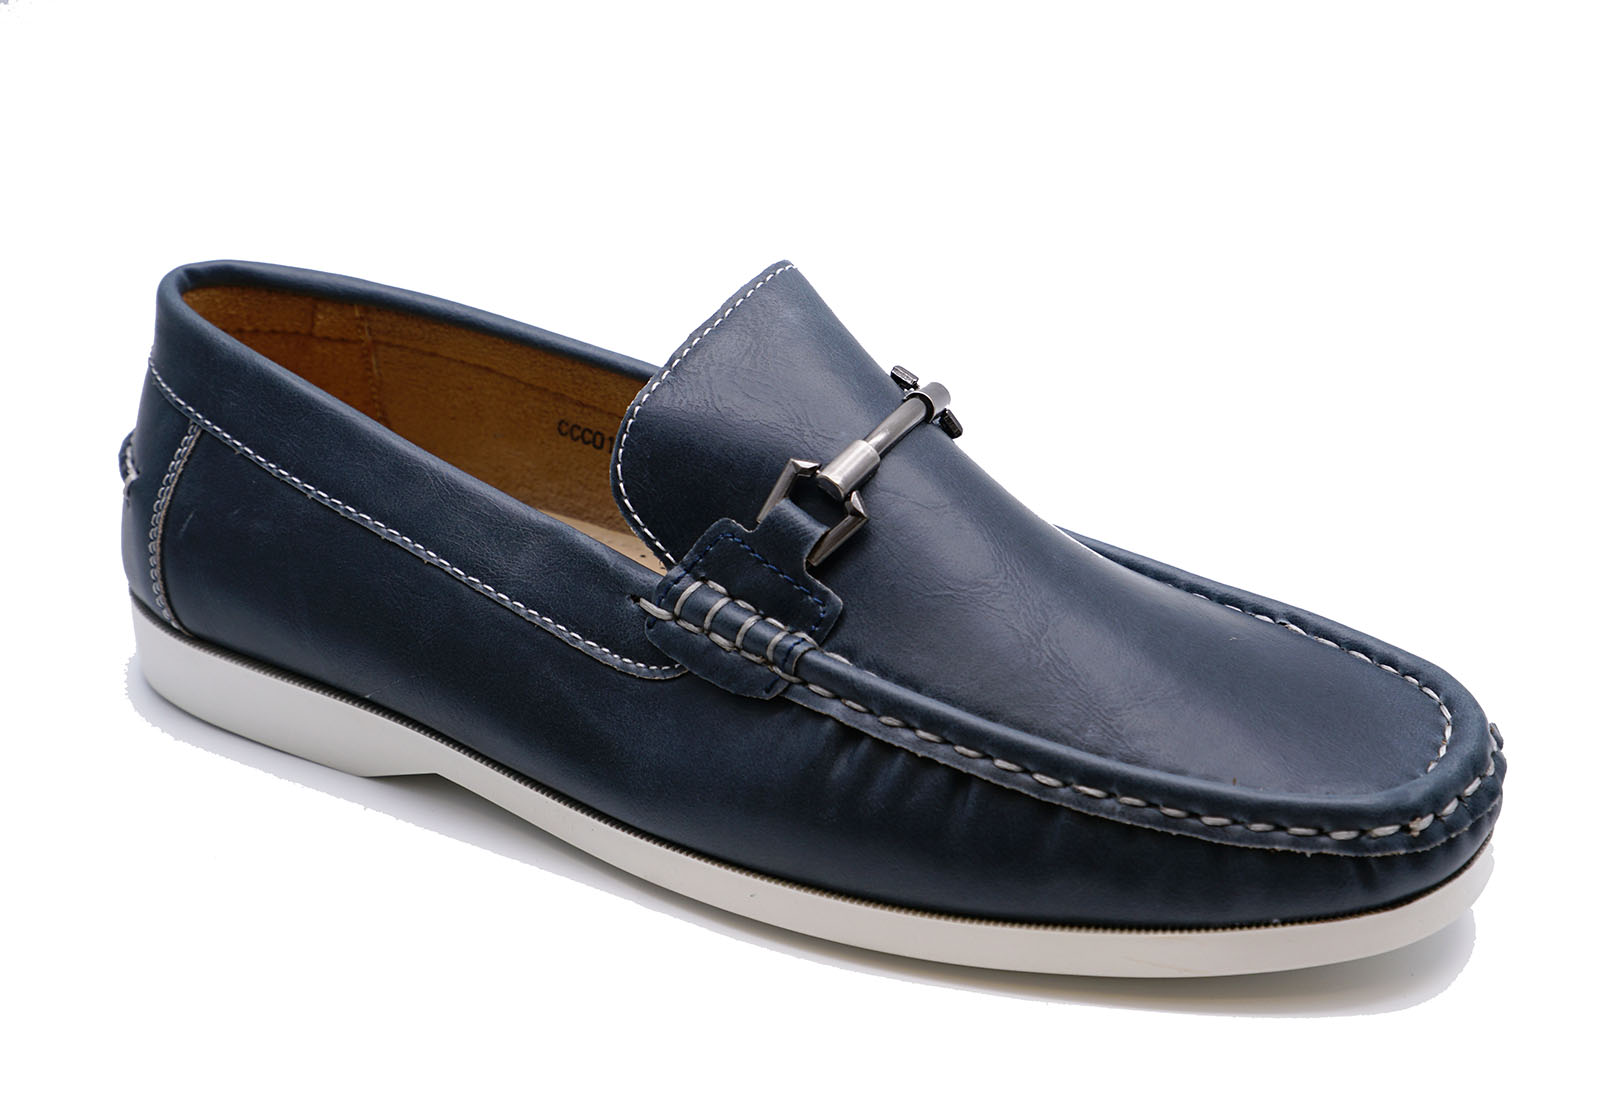 MENS NAVY SLIP-ON MOCCASINS LOAFERS DRIVING COMFY BOAT DECK CASUAL ...